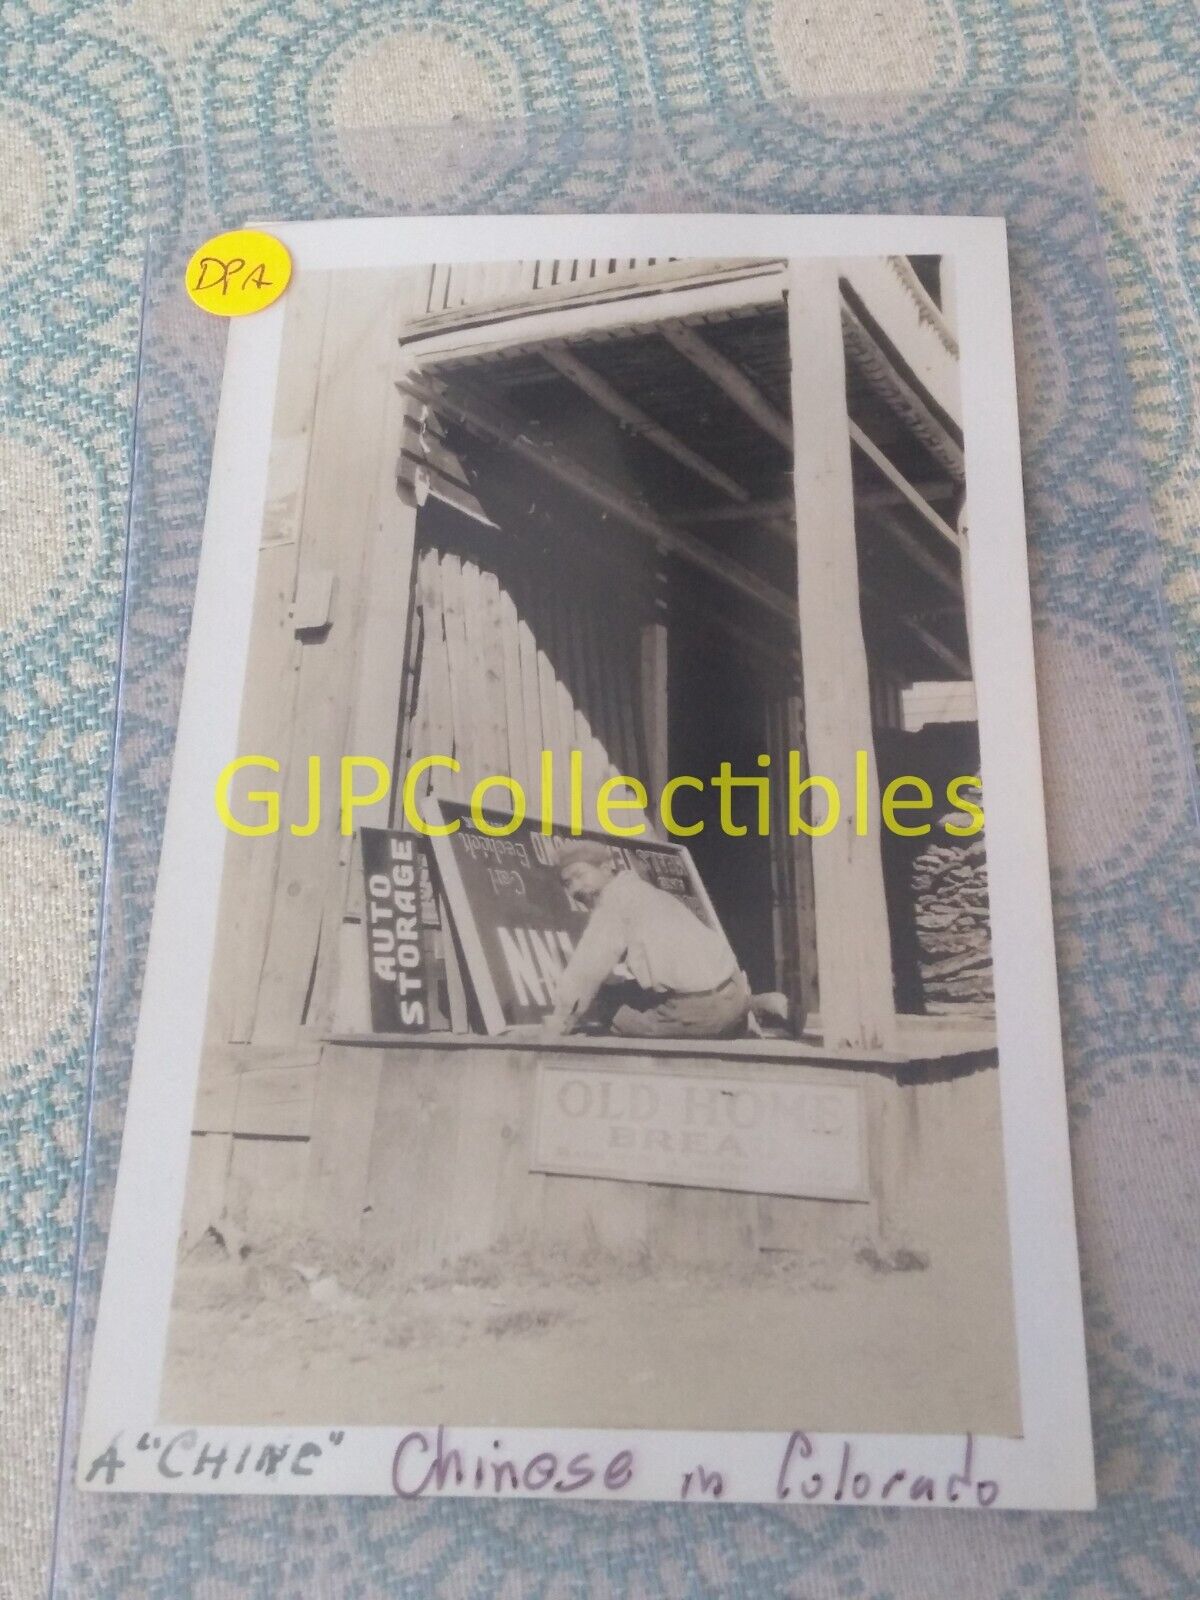 DPA VINTAGE PHOTOGRAPH Spencer Lionel Adams CHINESE LIVING IN COLORADO